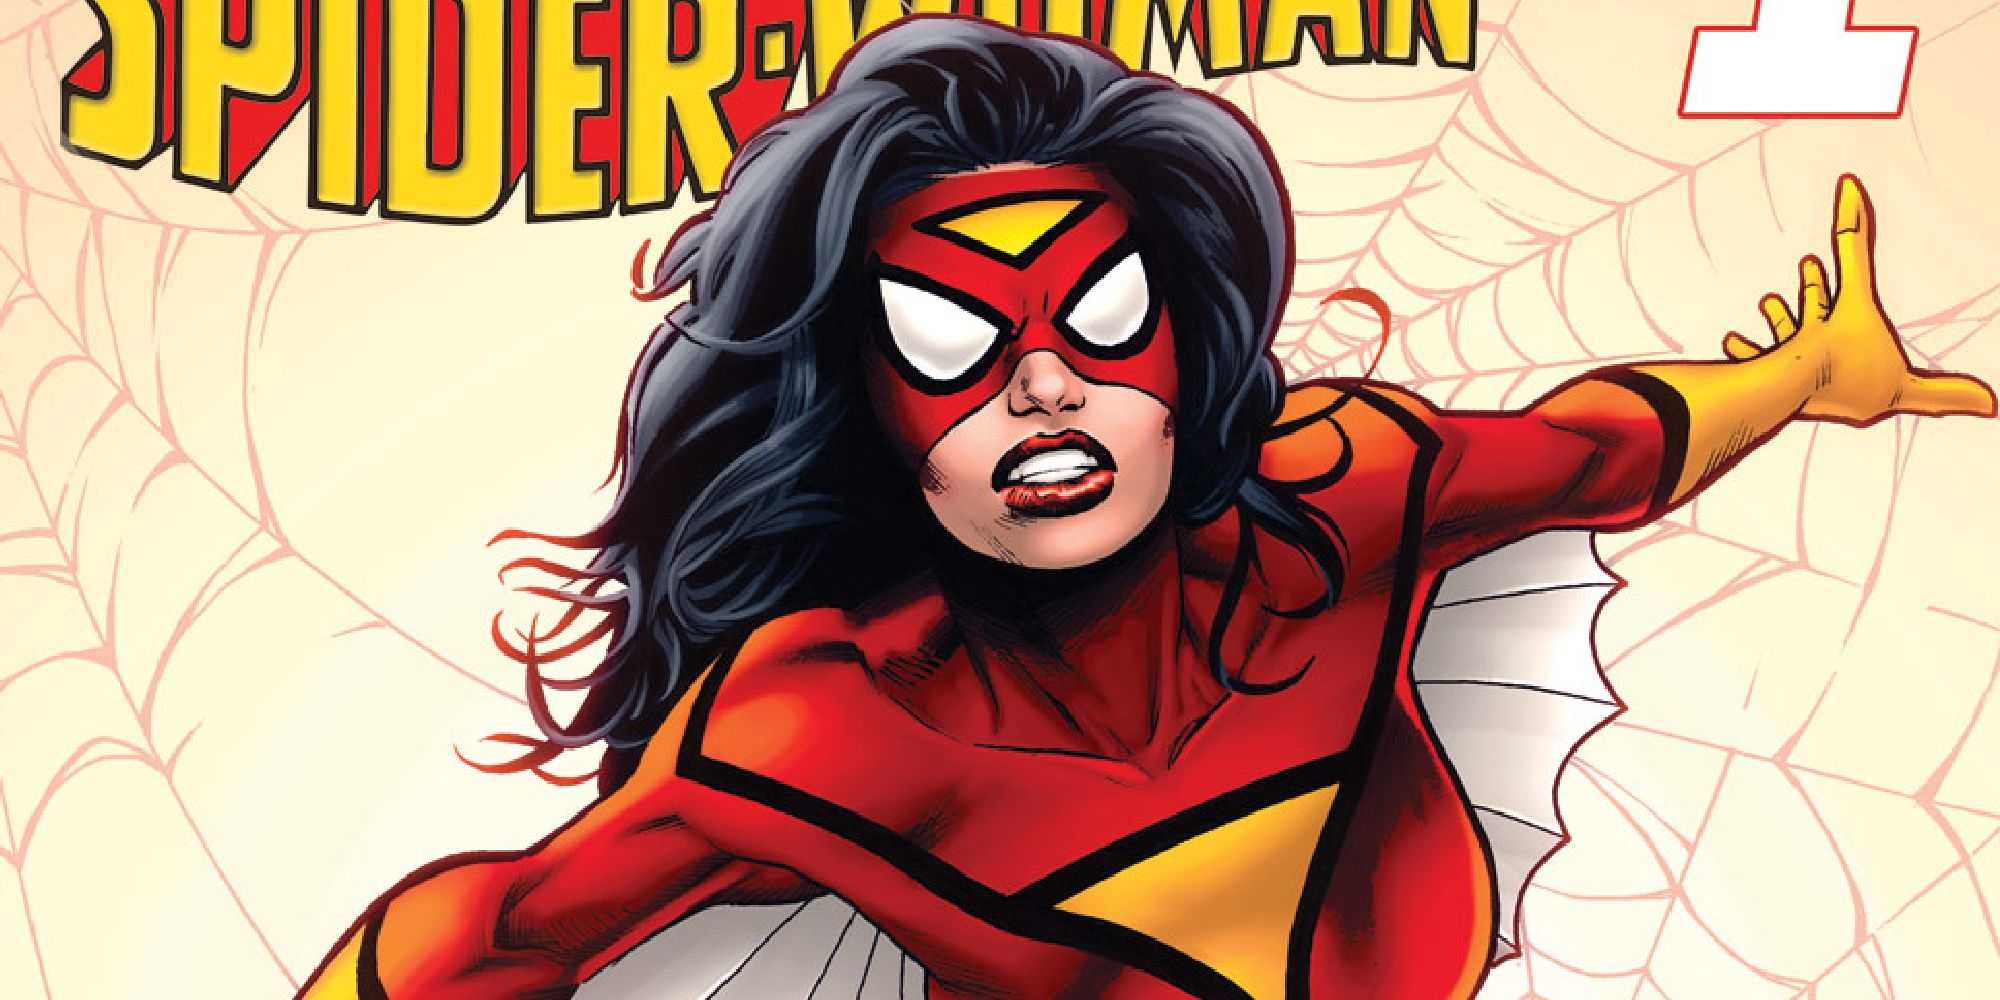 Spider-Woman 2014 cover depicting Spider-Woman jumping between webs